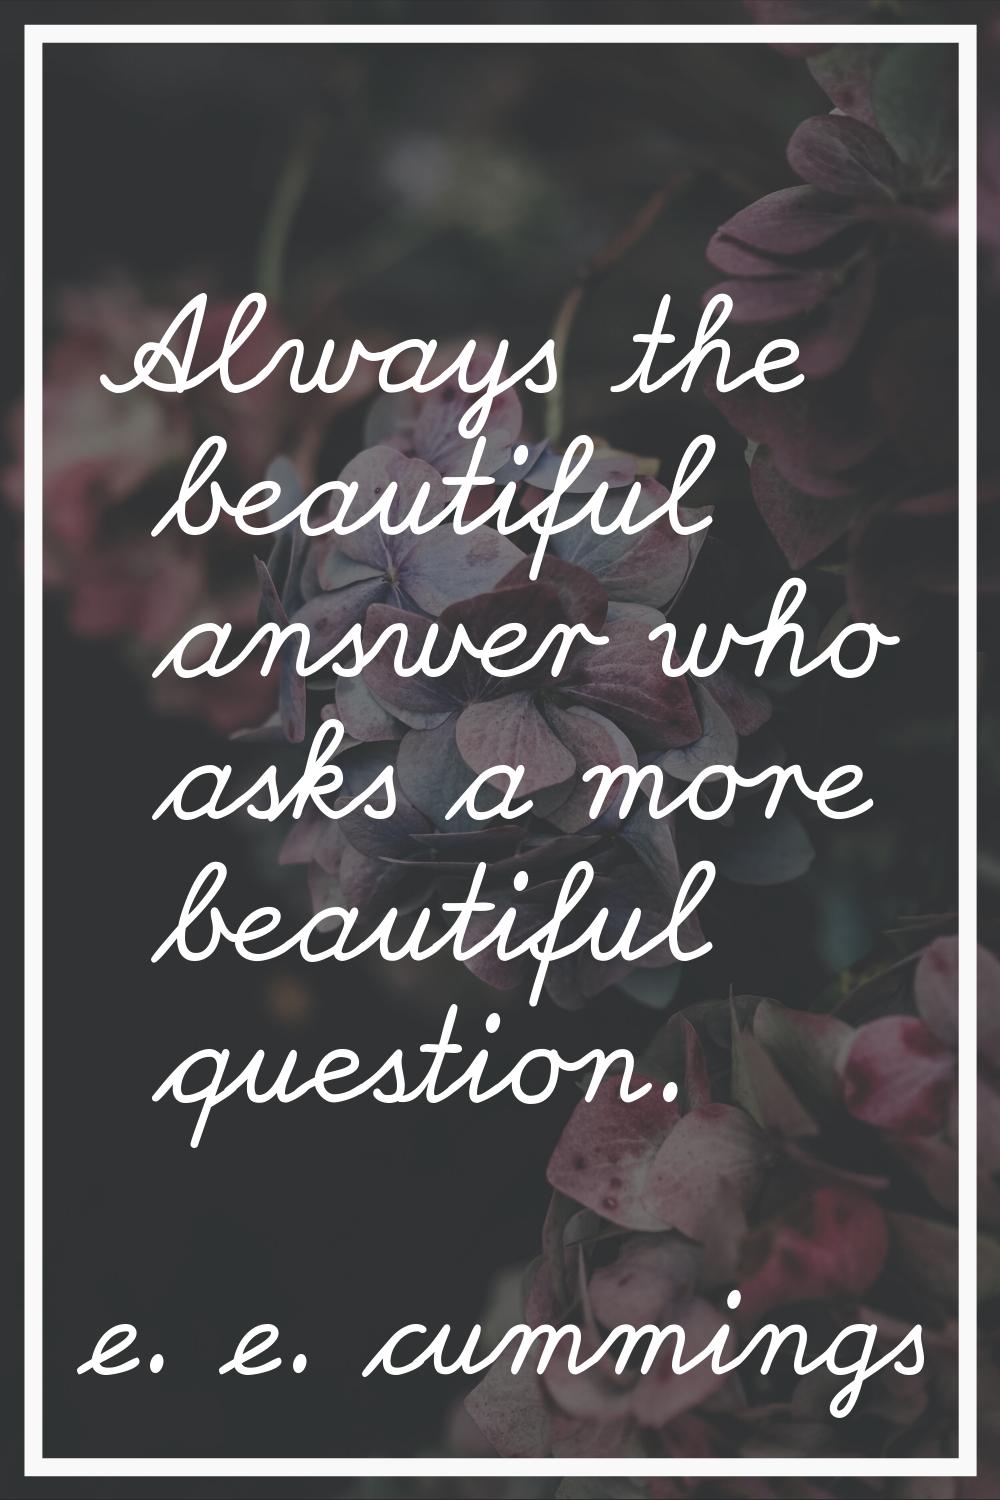 Always the beautiful answer who asks a more beautiful question.